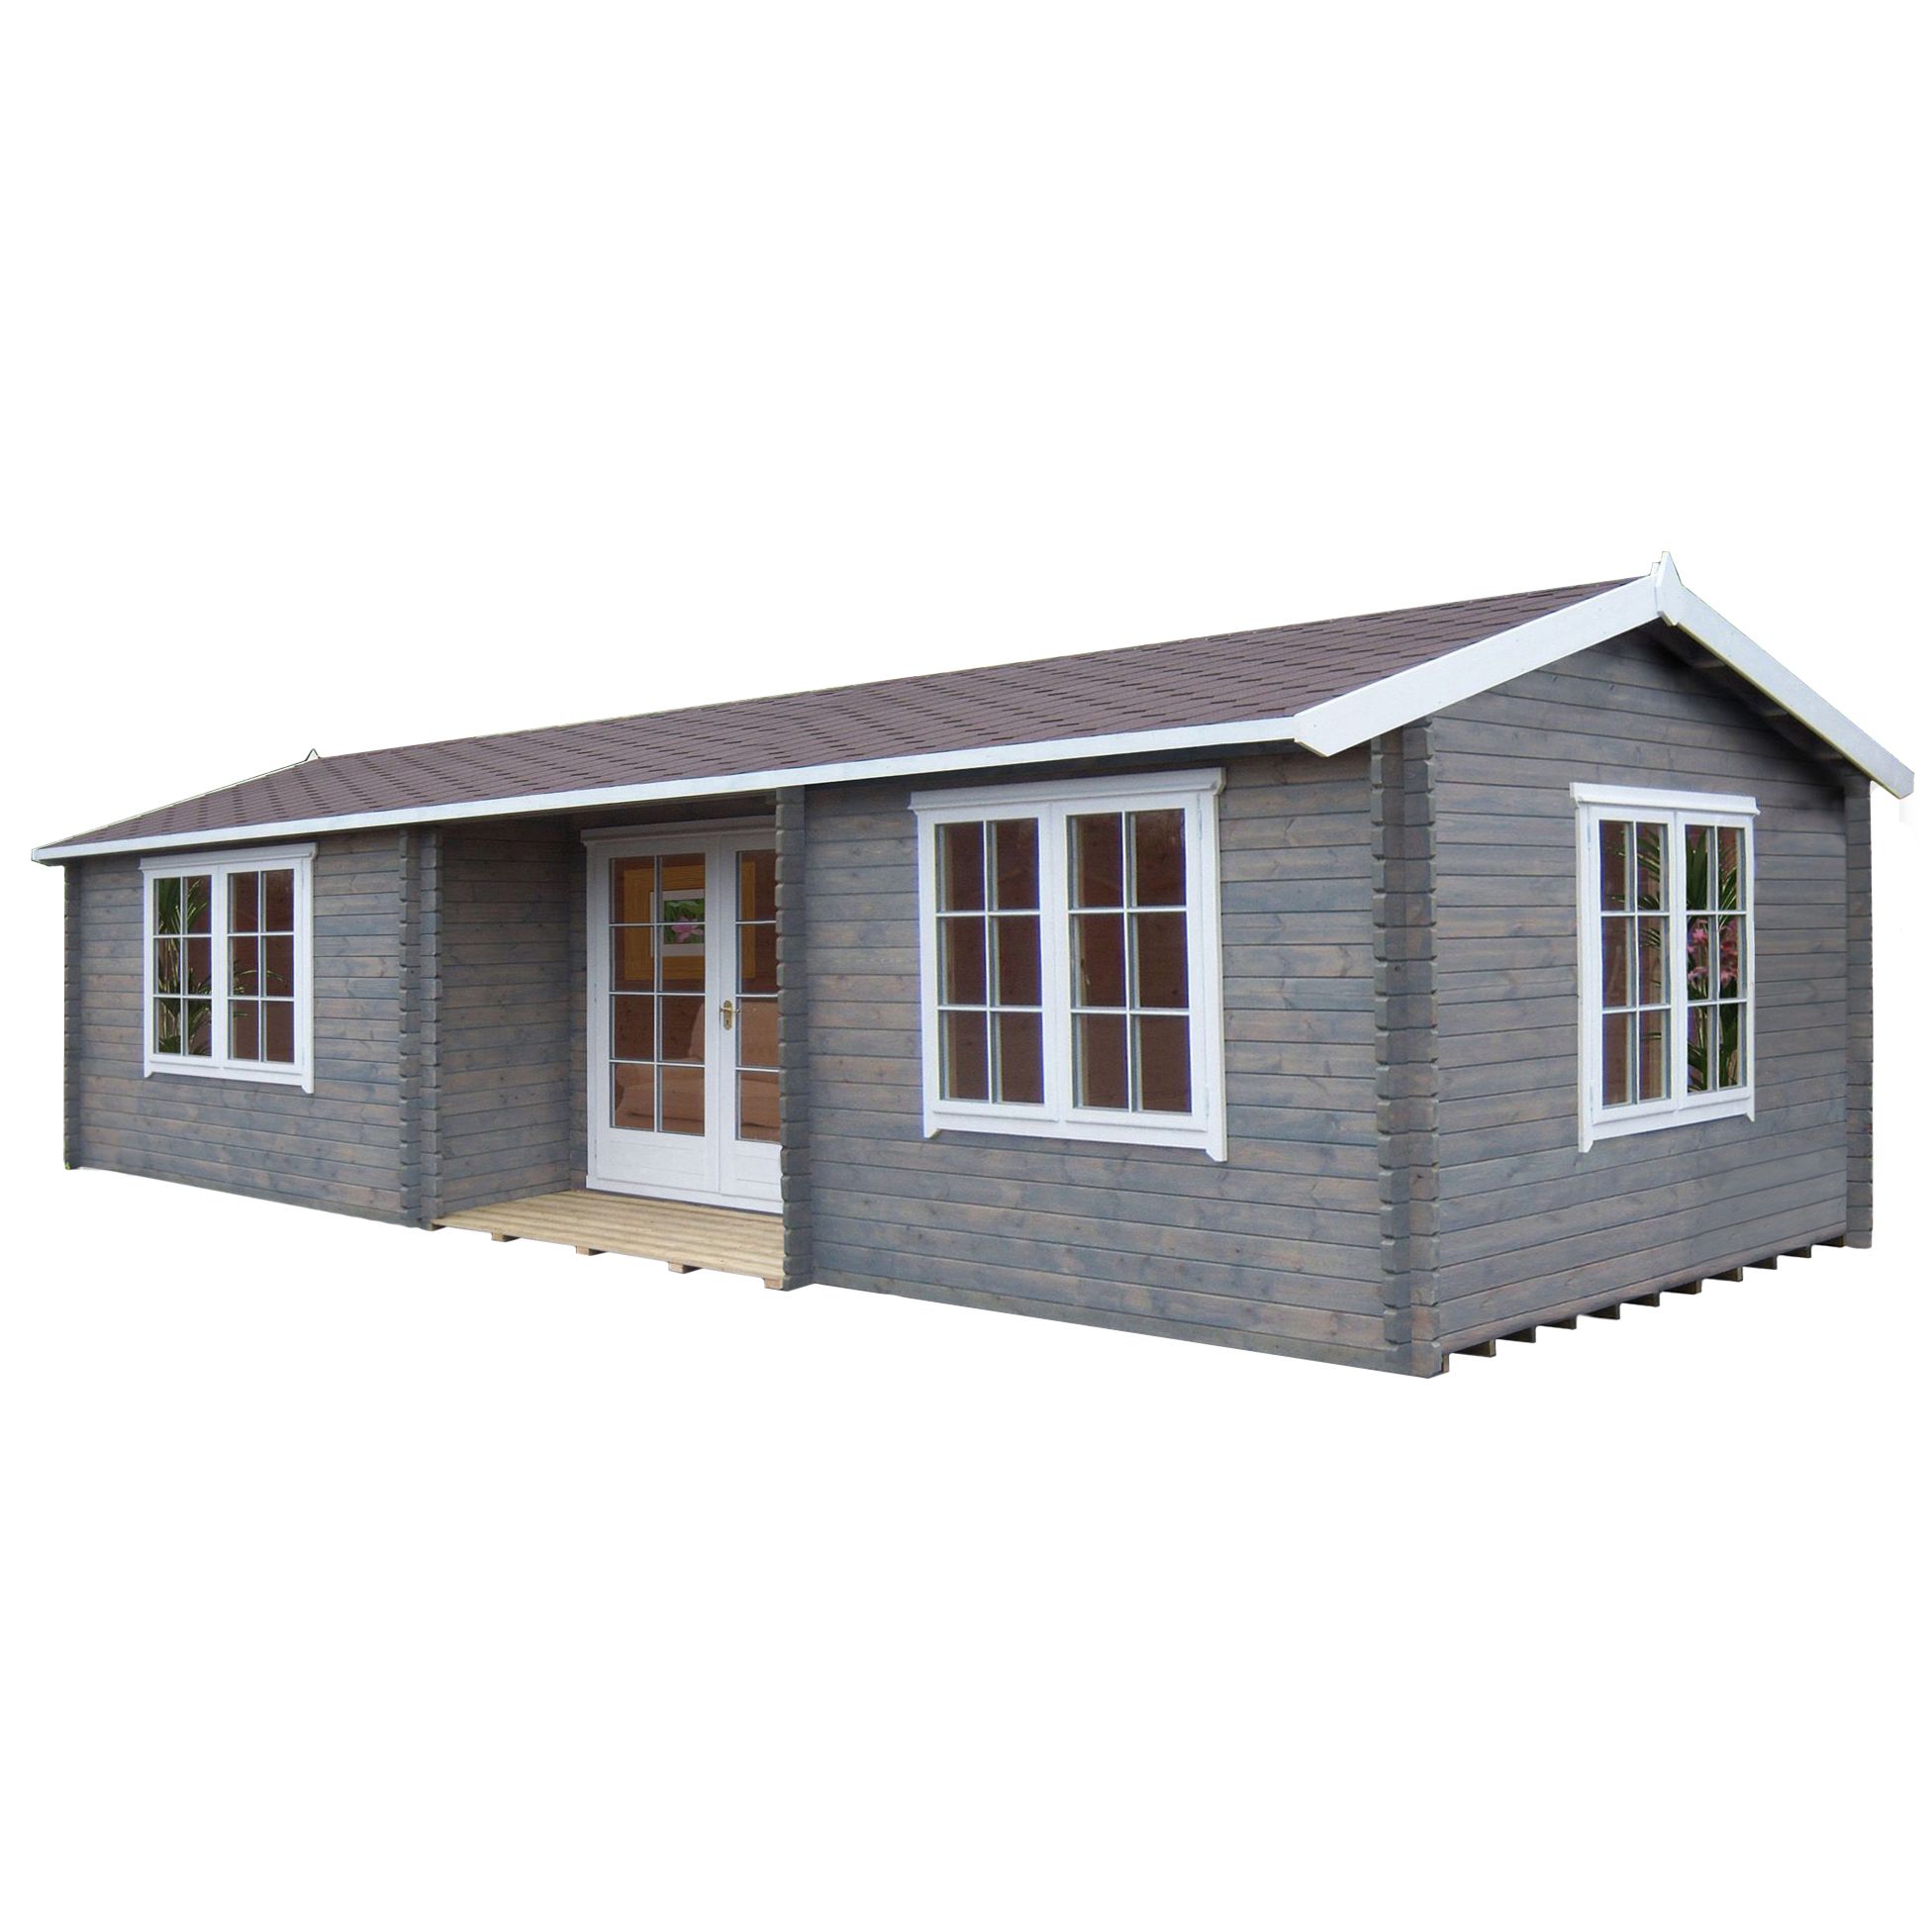 Shire Elveden Toughened glass Apex Tongue & groove Wooden Cabin with Felt tile roof